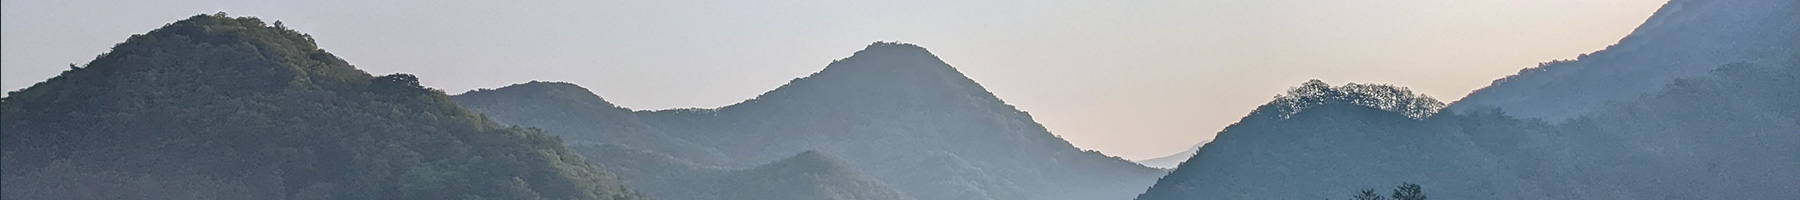 Mountains surround the Bruderhof community in Yeongwol, South Korea.